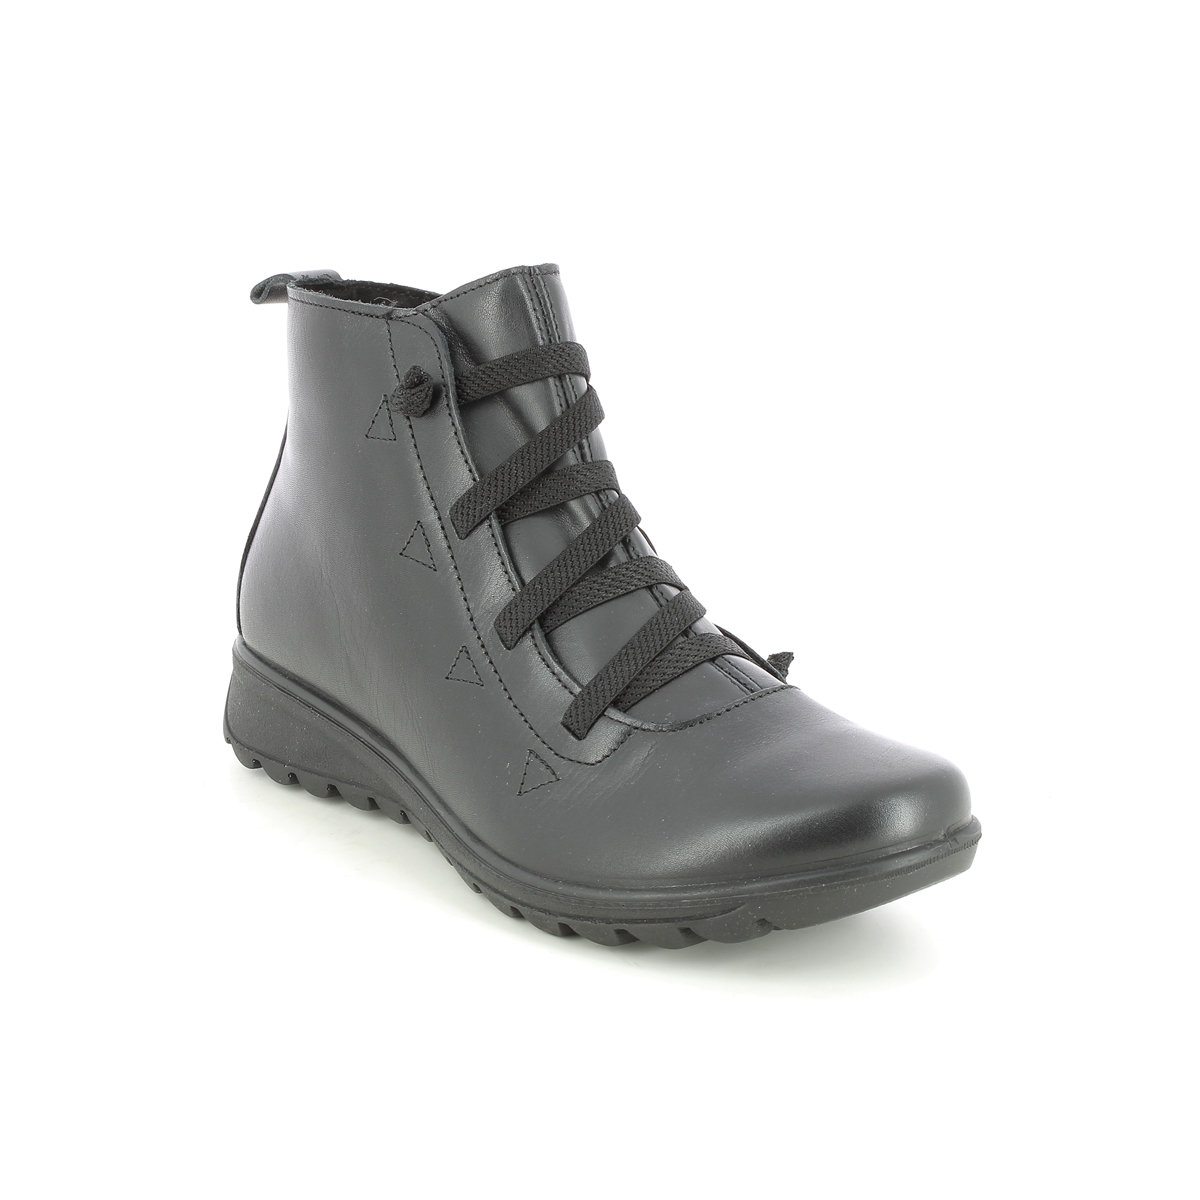 Imac Karenjungla Black Leather Womens Ankle Boots 6260-1400011 In Size 39 In Plain Black Leather